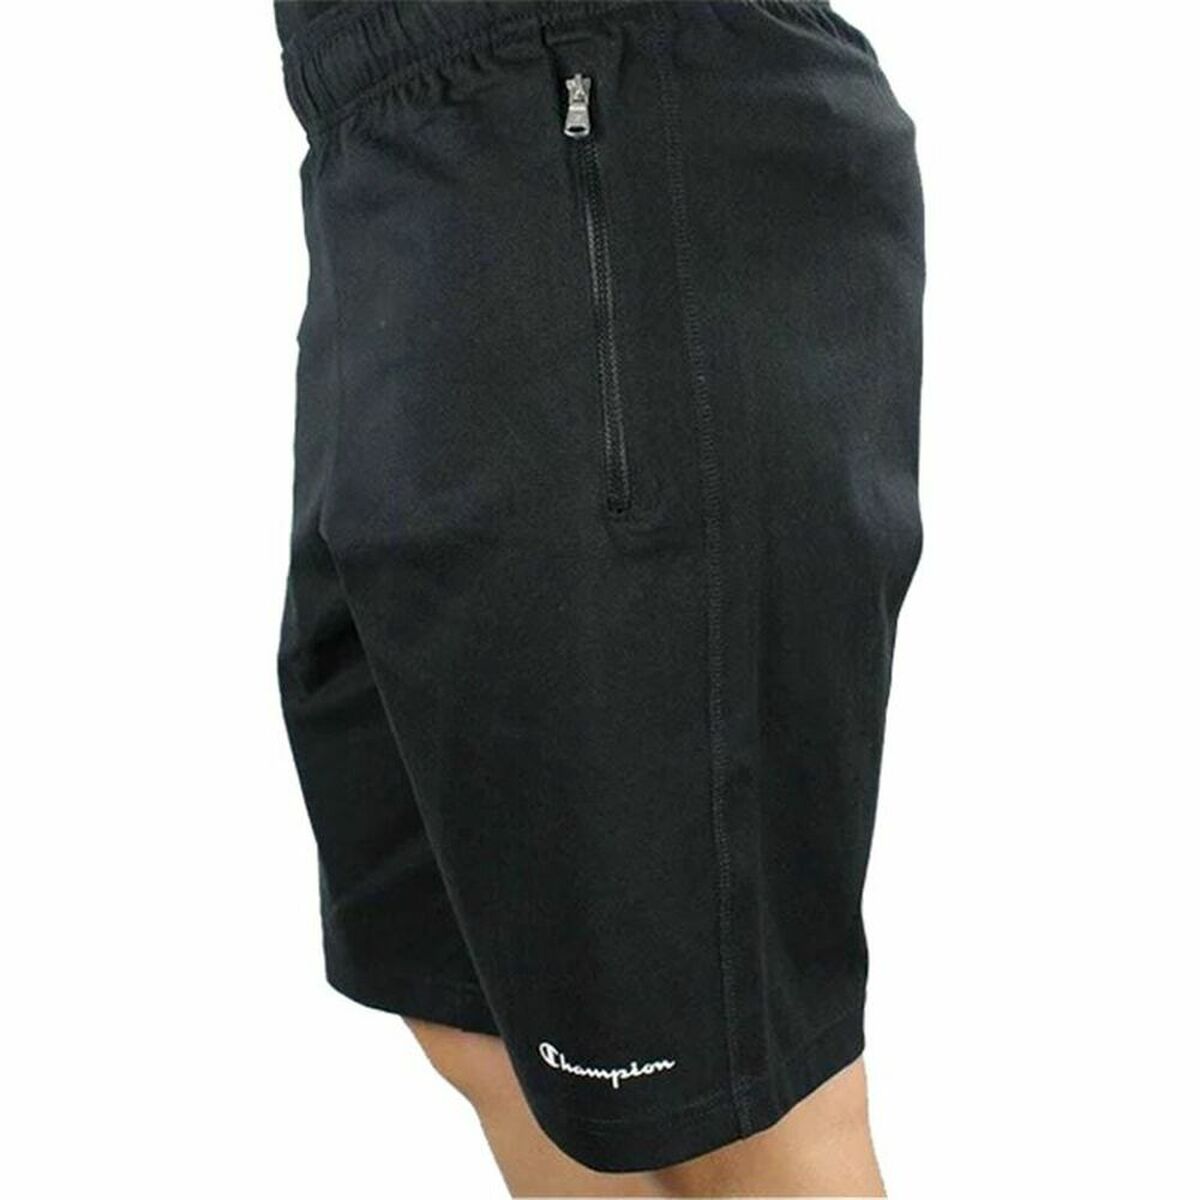 Men's Champion Athletic Shorts navy blue side view